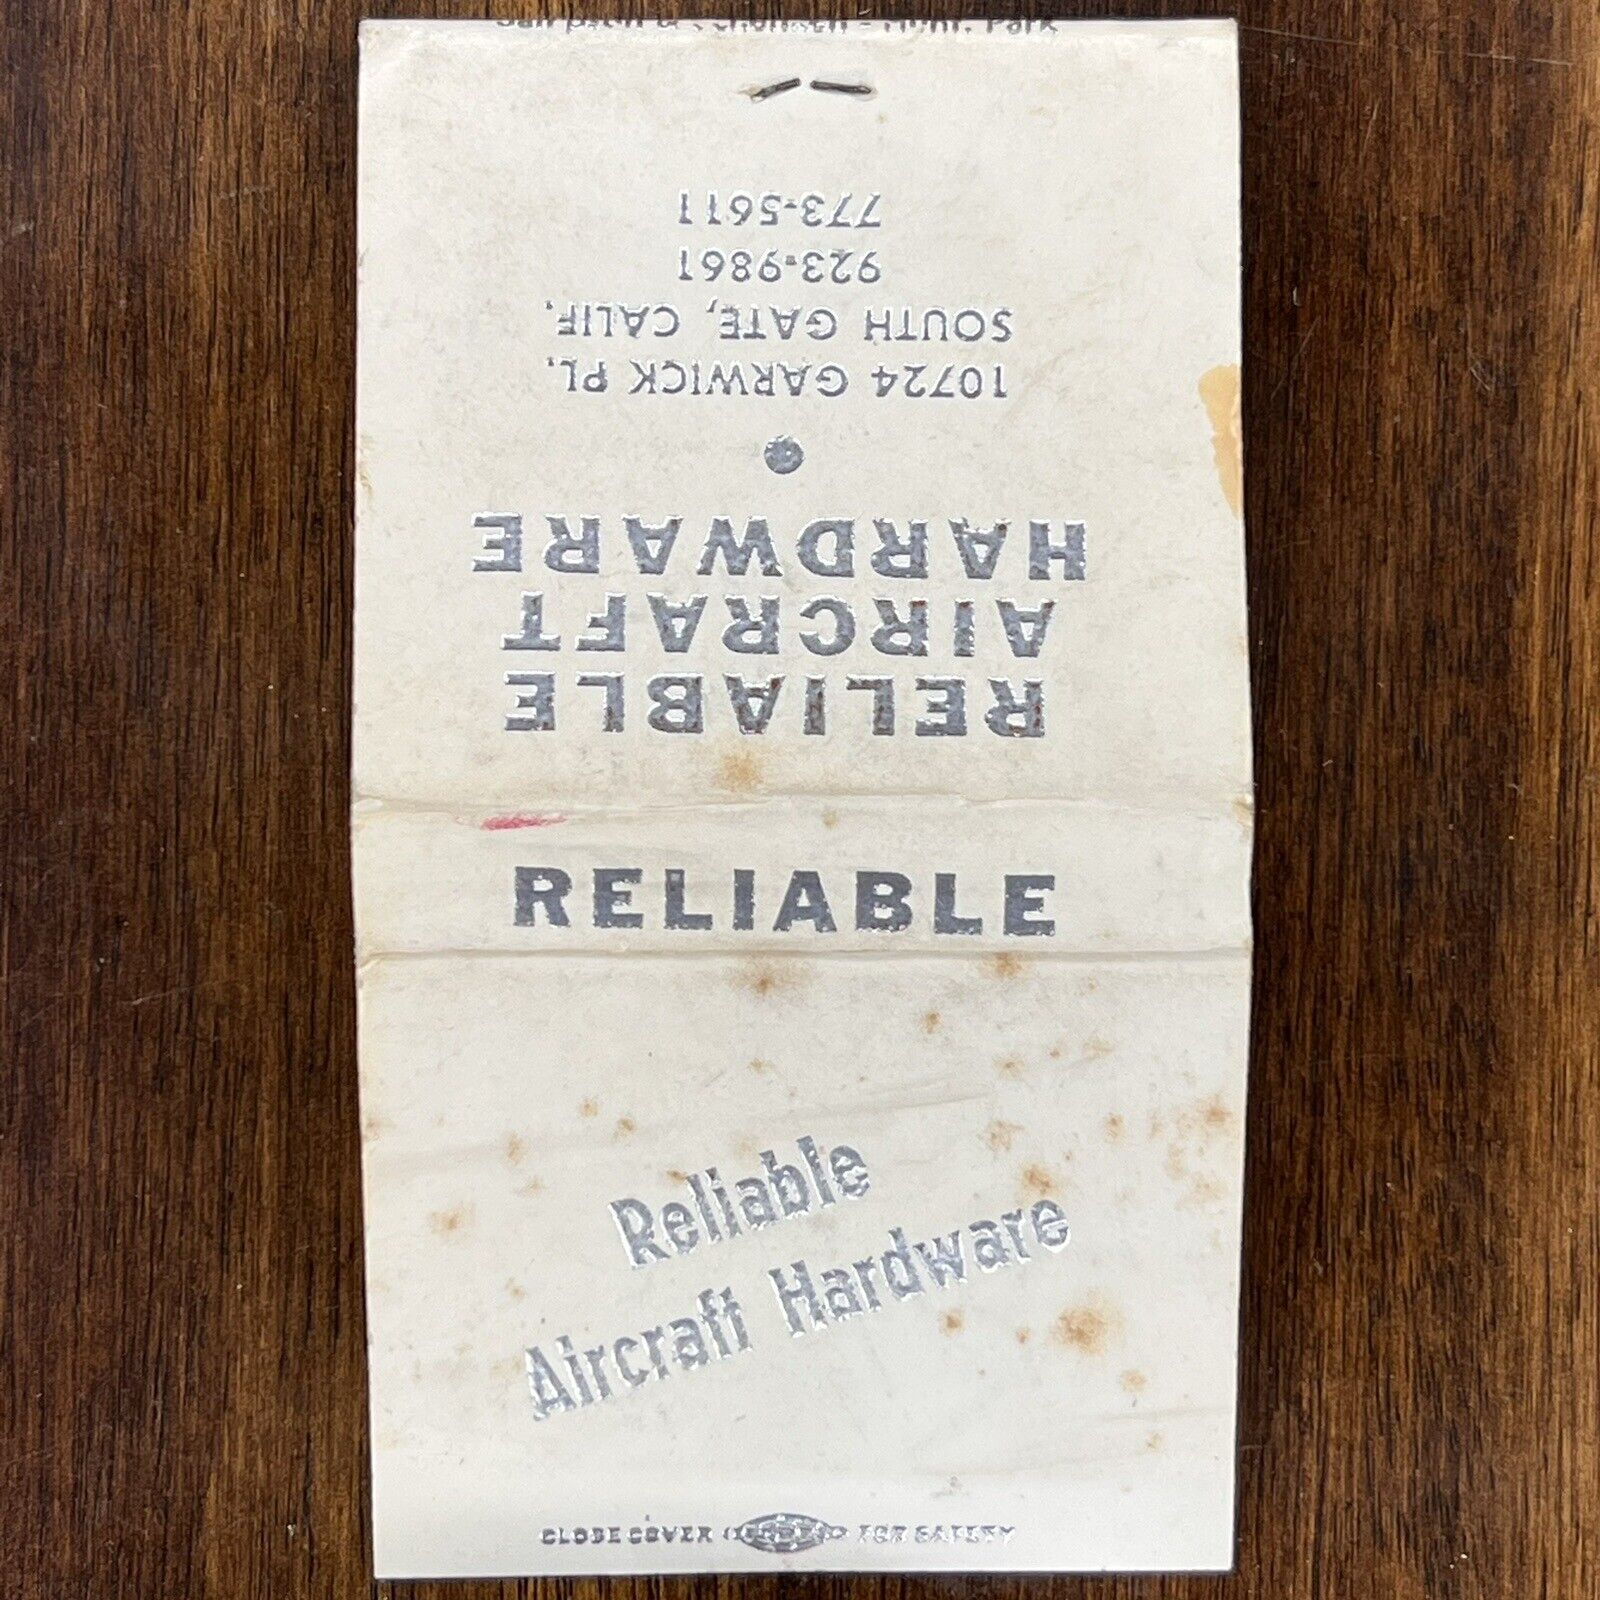 Vintage Matchbook Reliable Aircraft Hardware South Gate CA Matches Unstruck